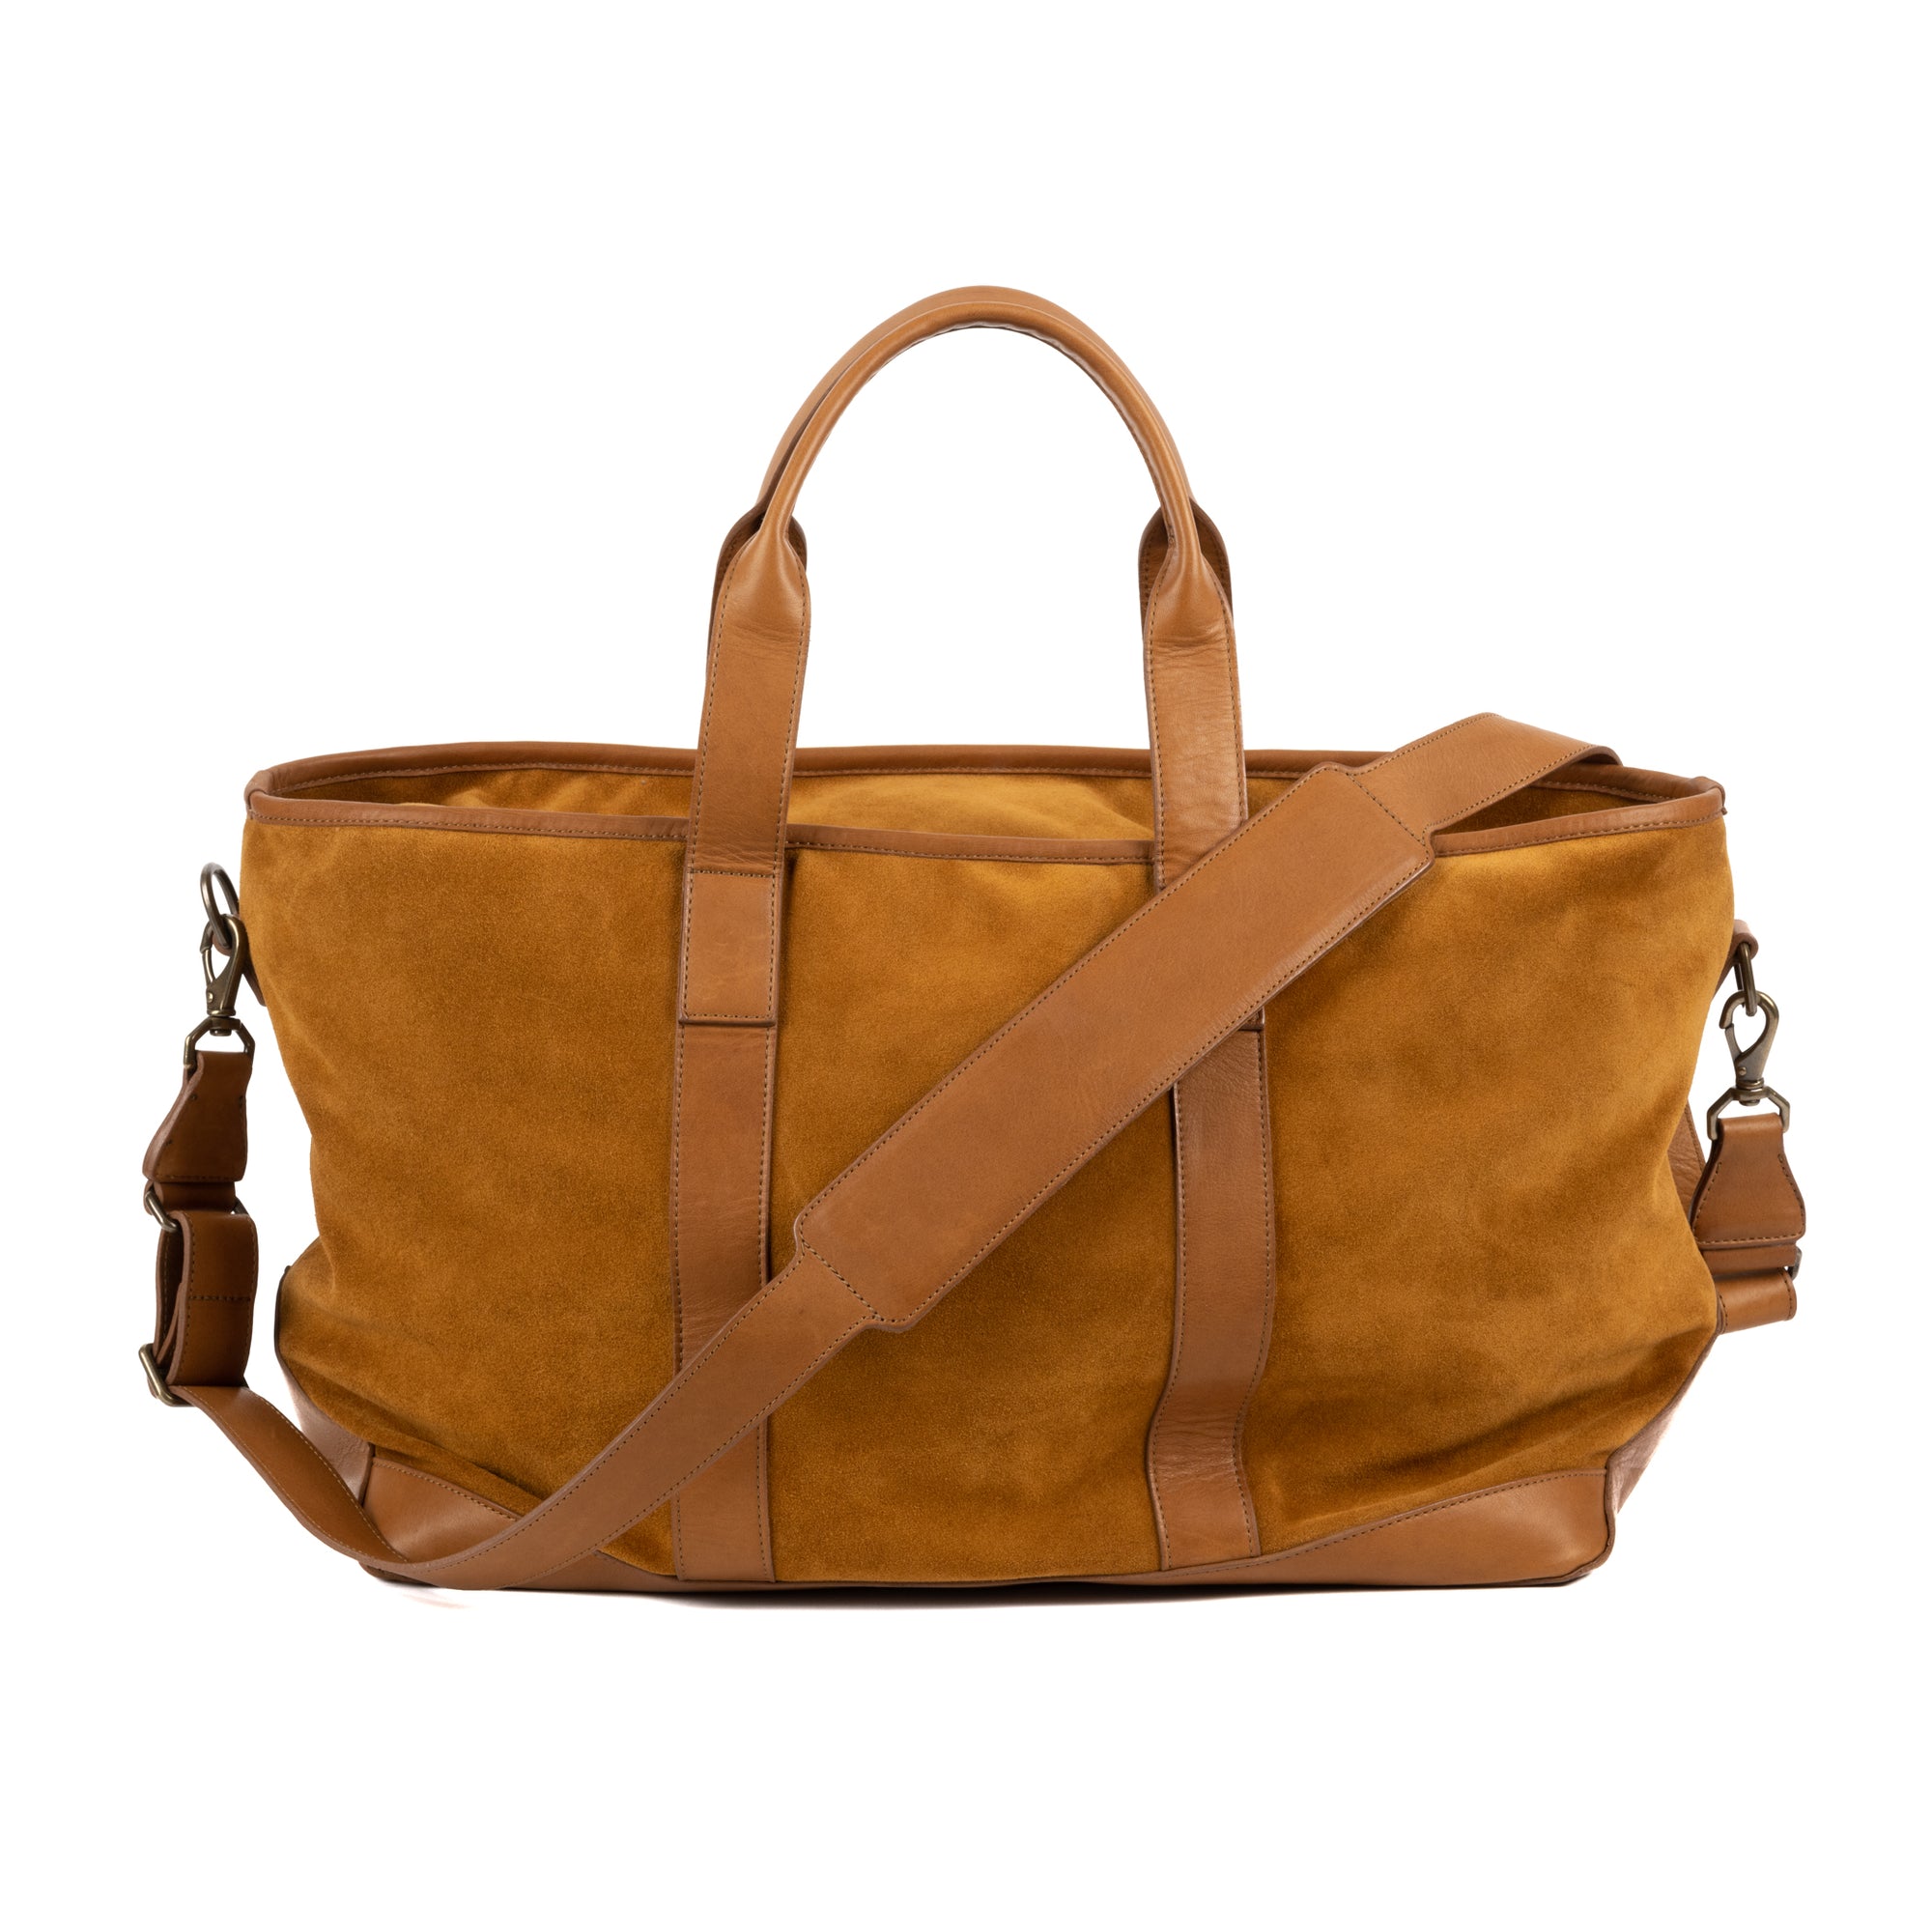 Alex Suede and Leather Travel Bag in Valencia Cider & Valhalla Nutmeg by Moore & Giles